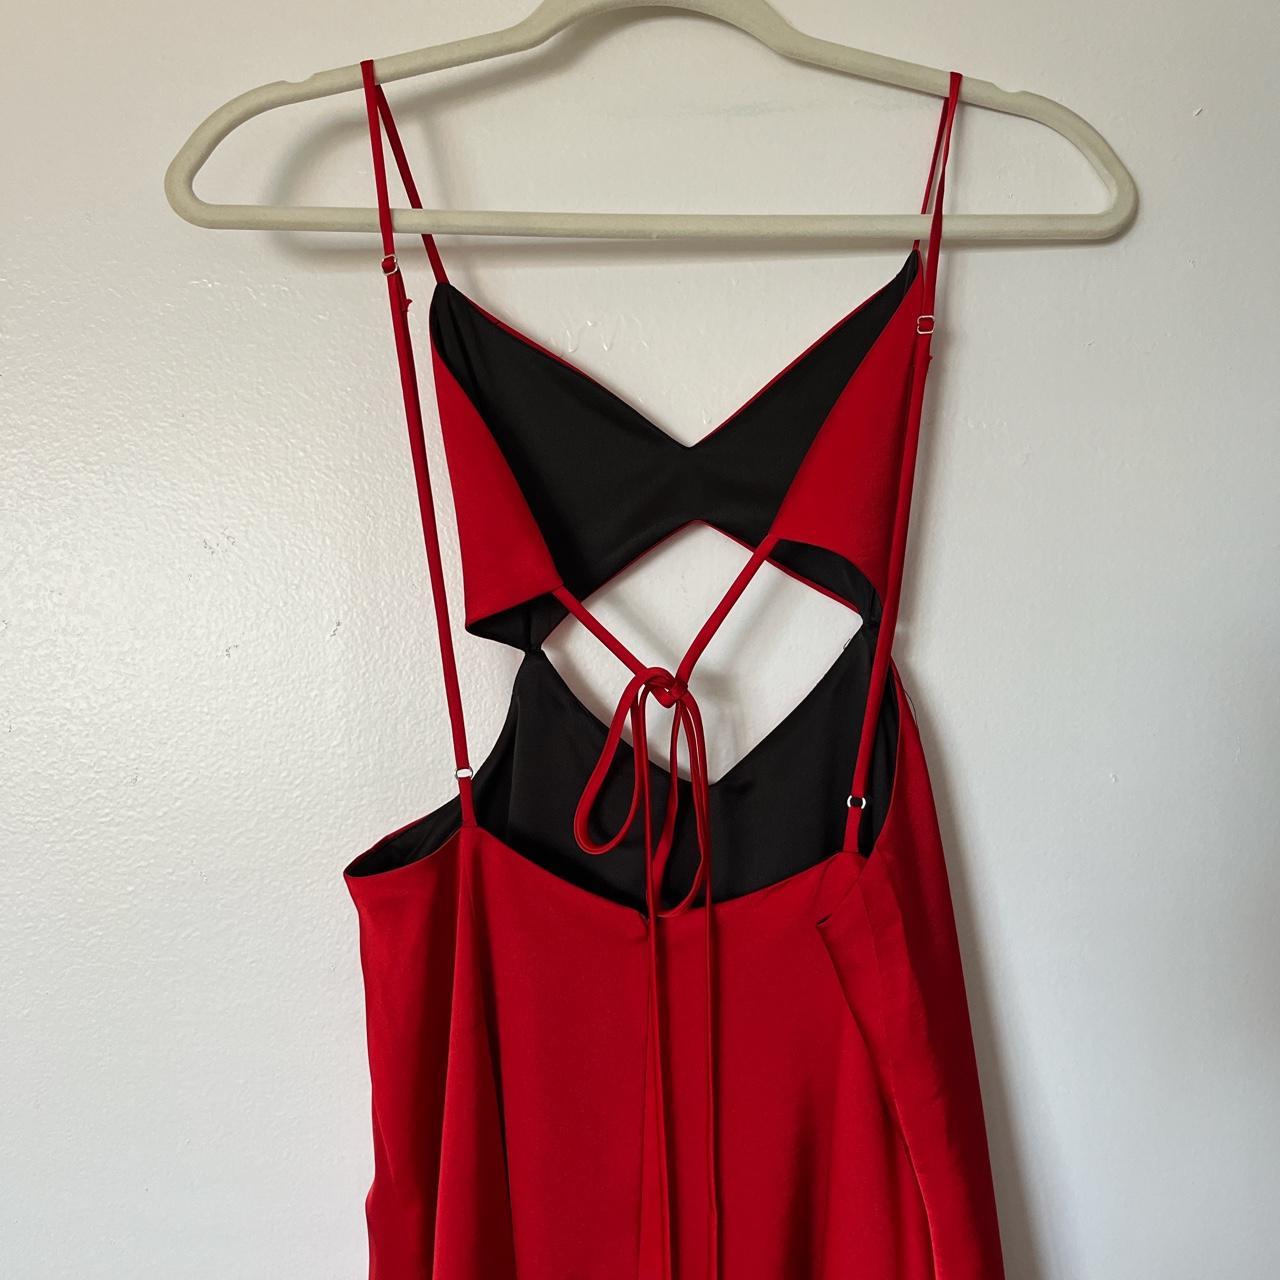 Capulet Women's Red and Black Dress (2)